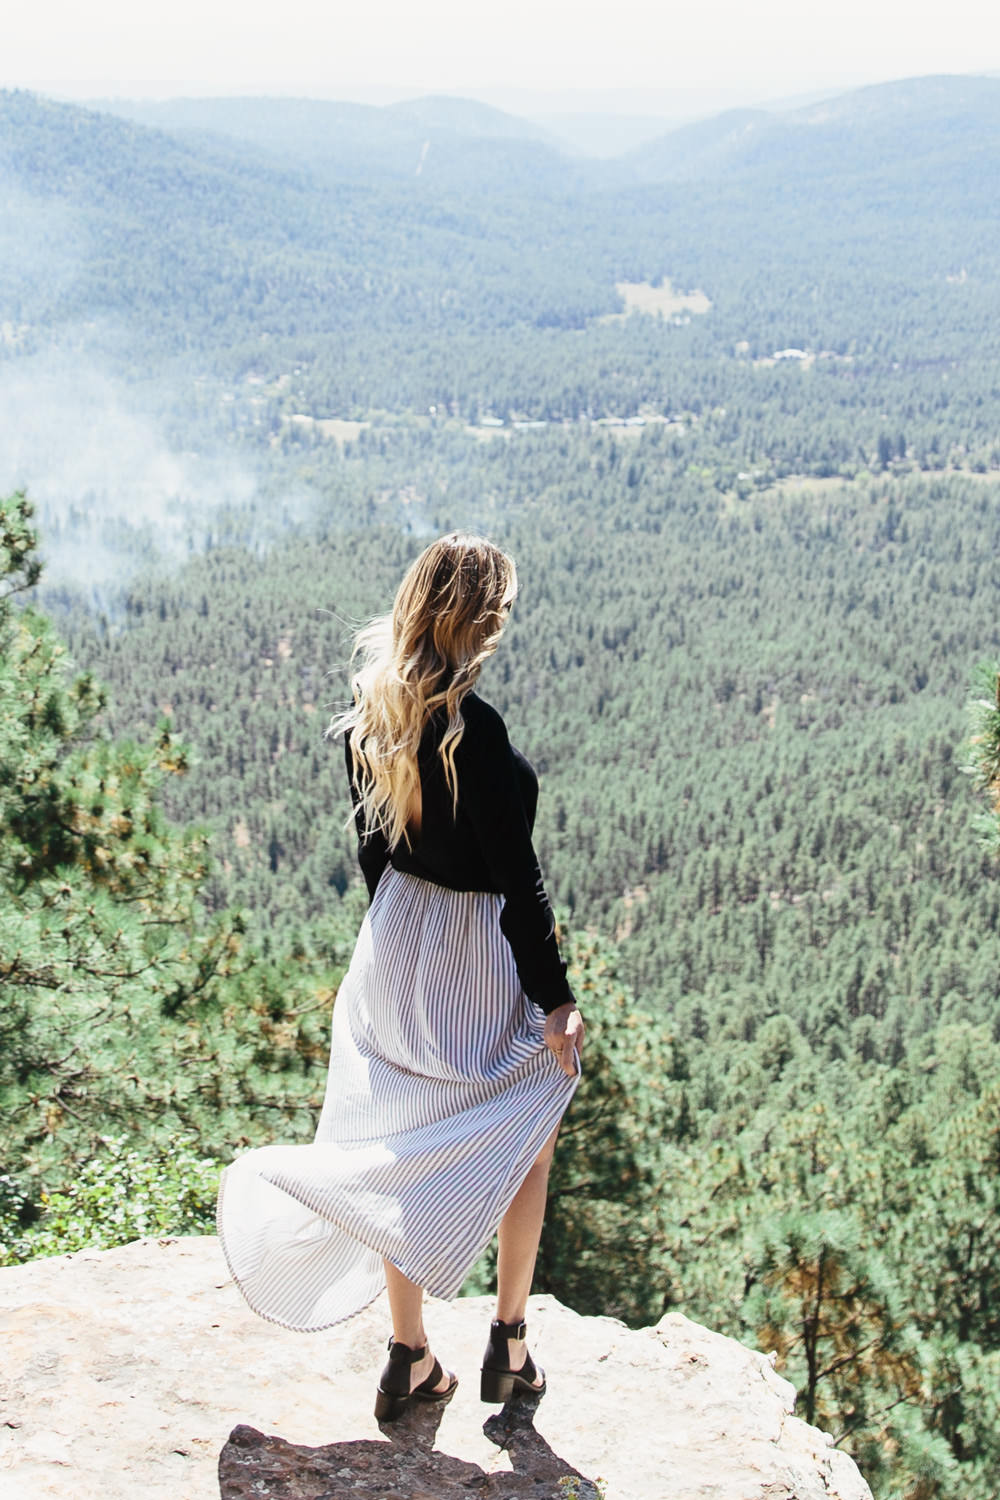 Dash of Darling styles a keyhole neckline top with a maxi skirt and DVF sunglasses while exploring Payson Arizona in the Fall.